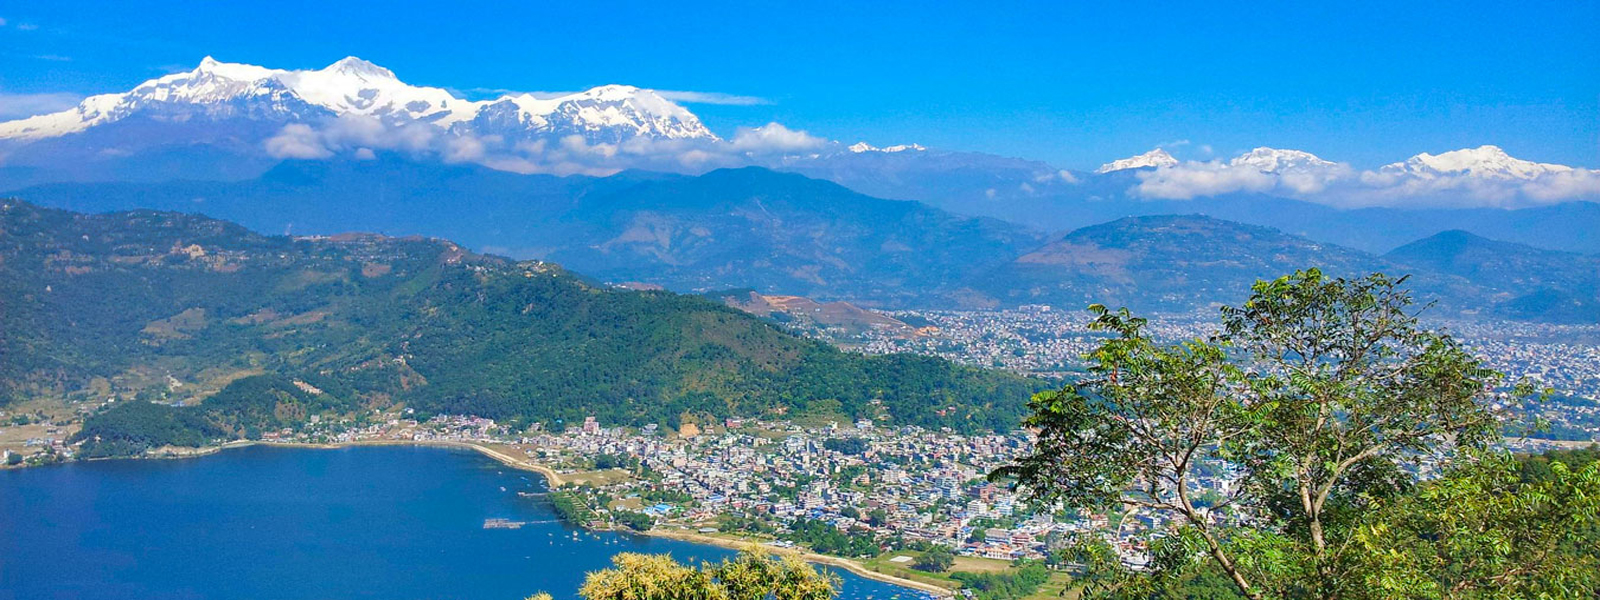 Discover The Best Of Nepal - 10 Days